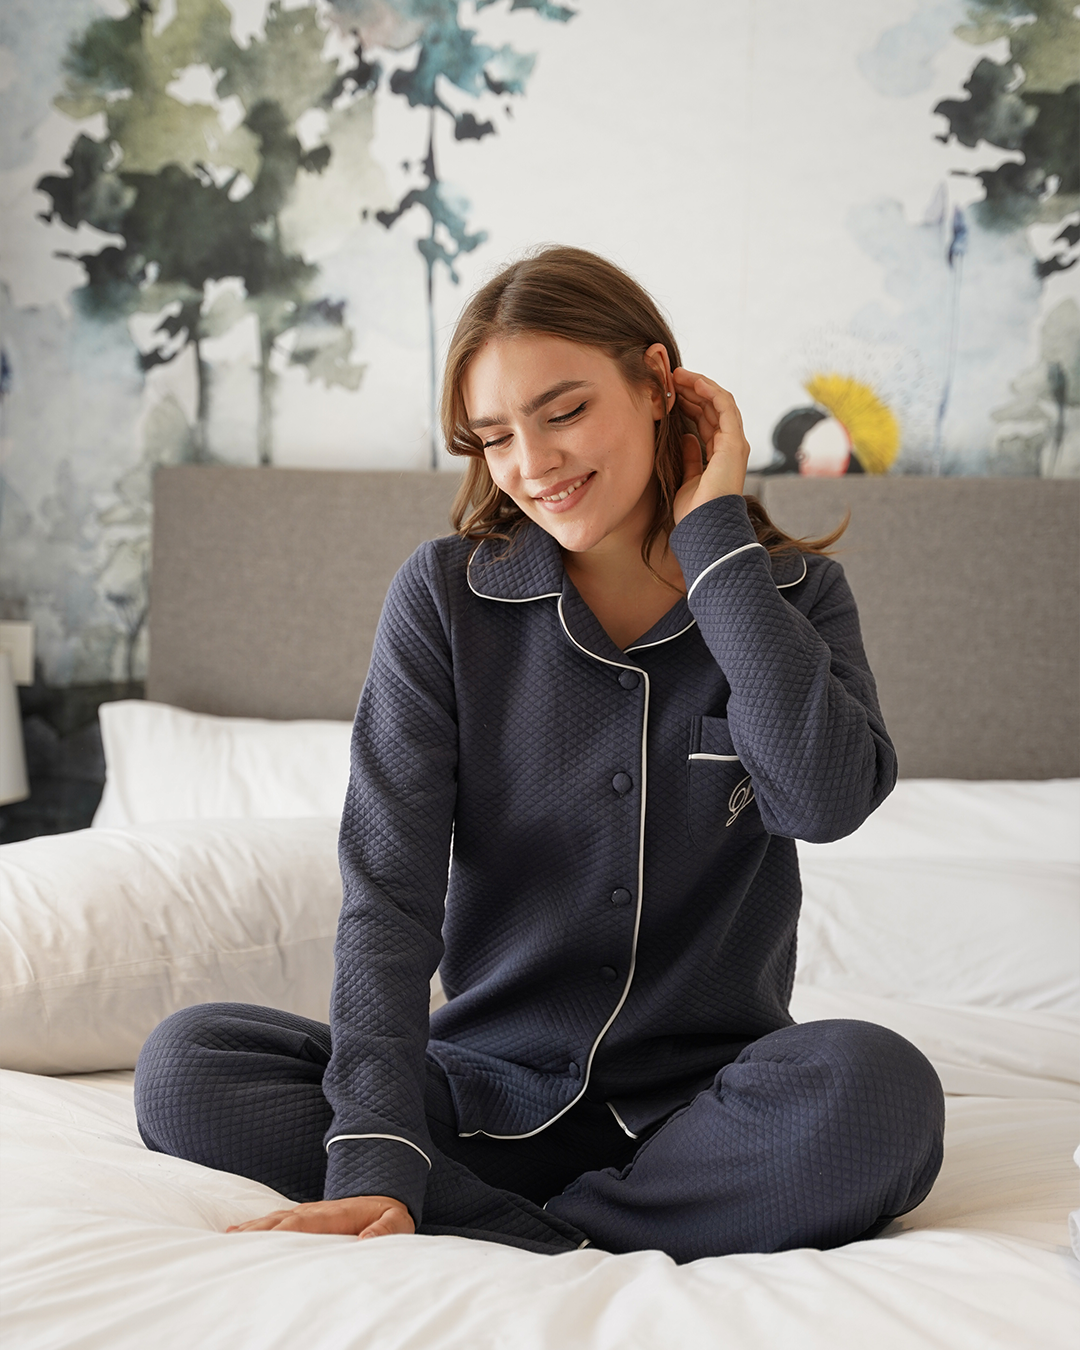 D Women's open pajamas with embroidery on the pocket as a caponet